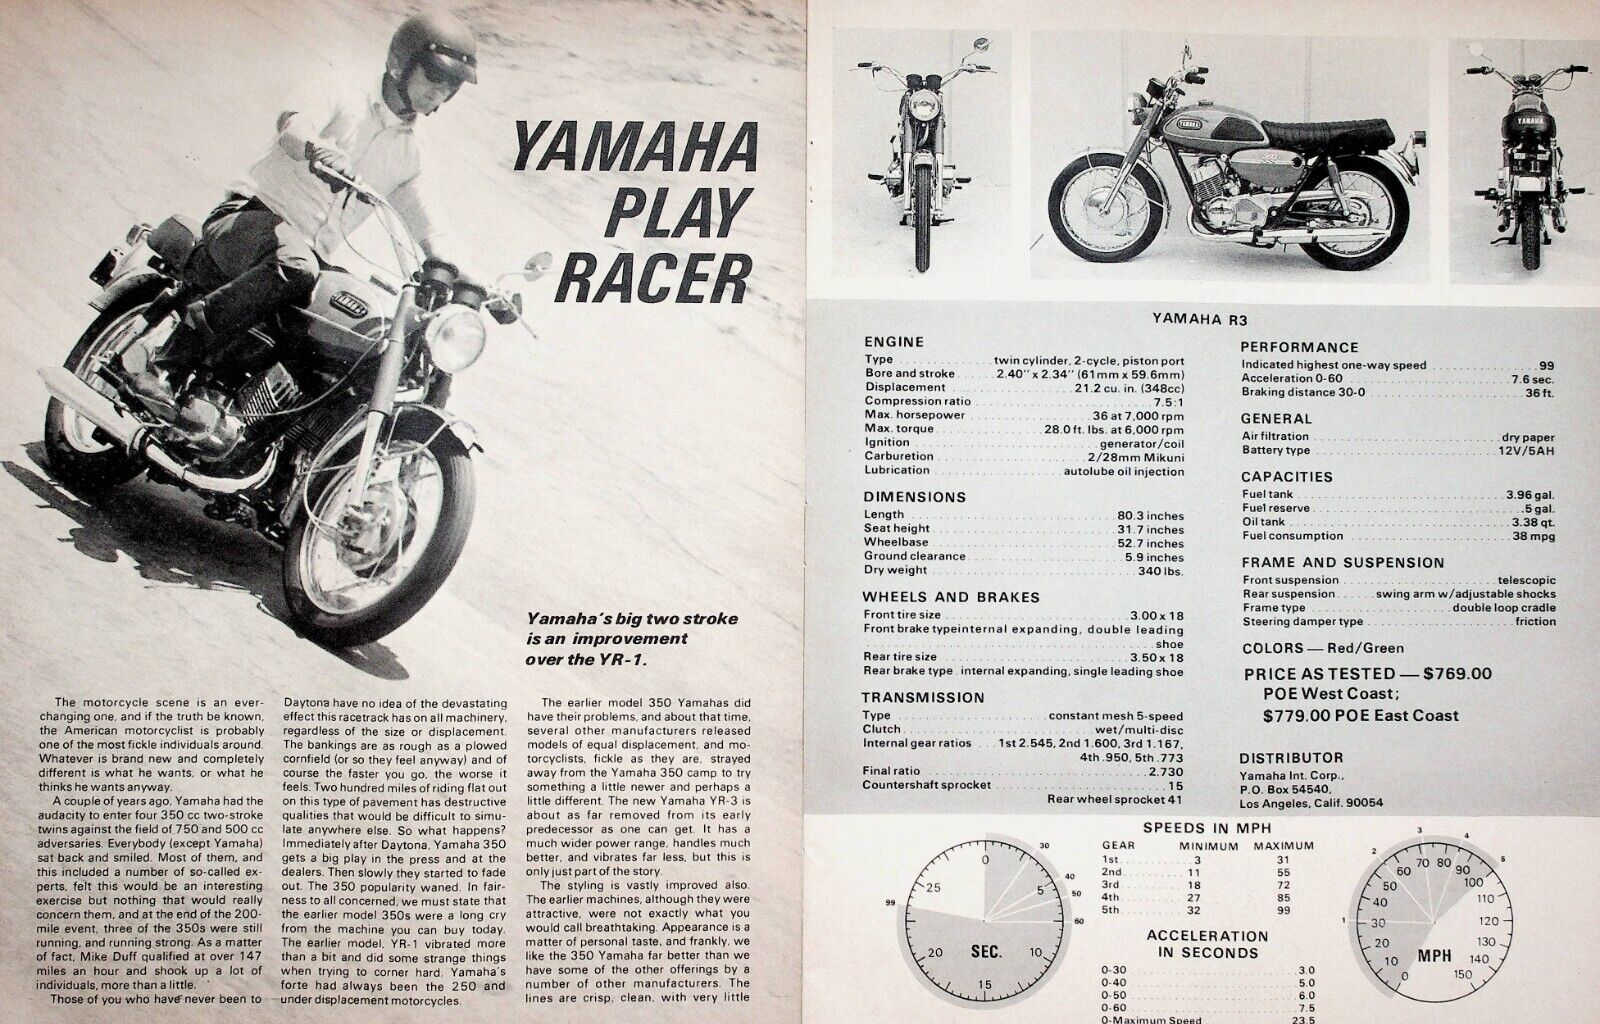 1969 Yamaha R3 Play Racer - 5-Page Vintage Motorcycle Road Test Article